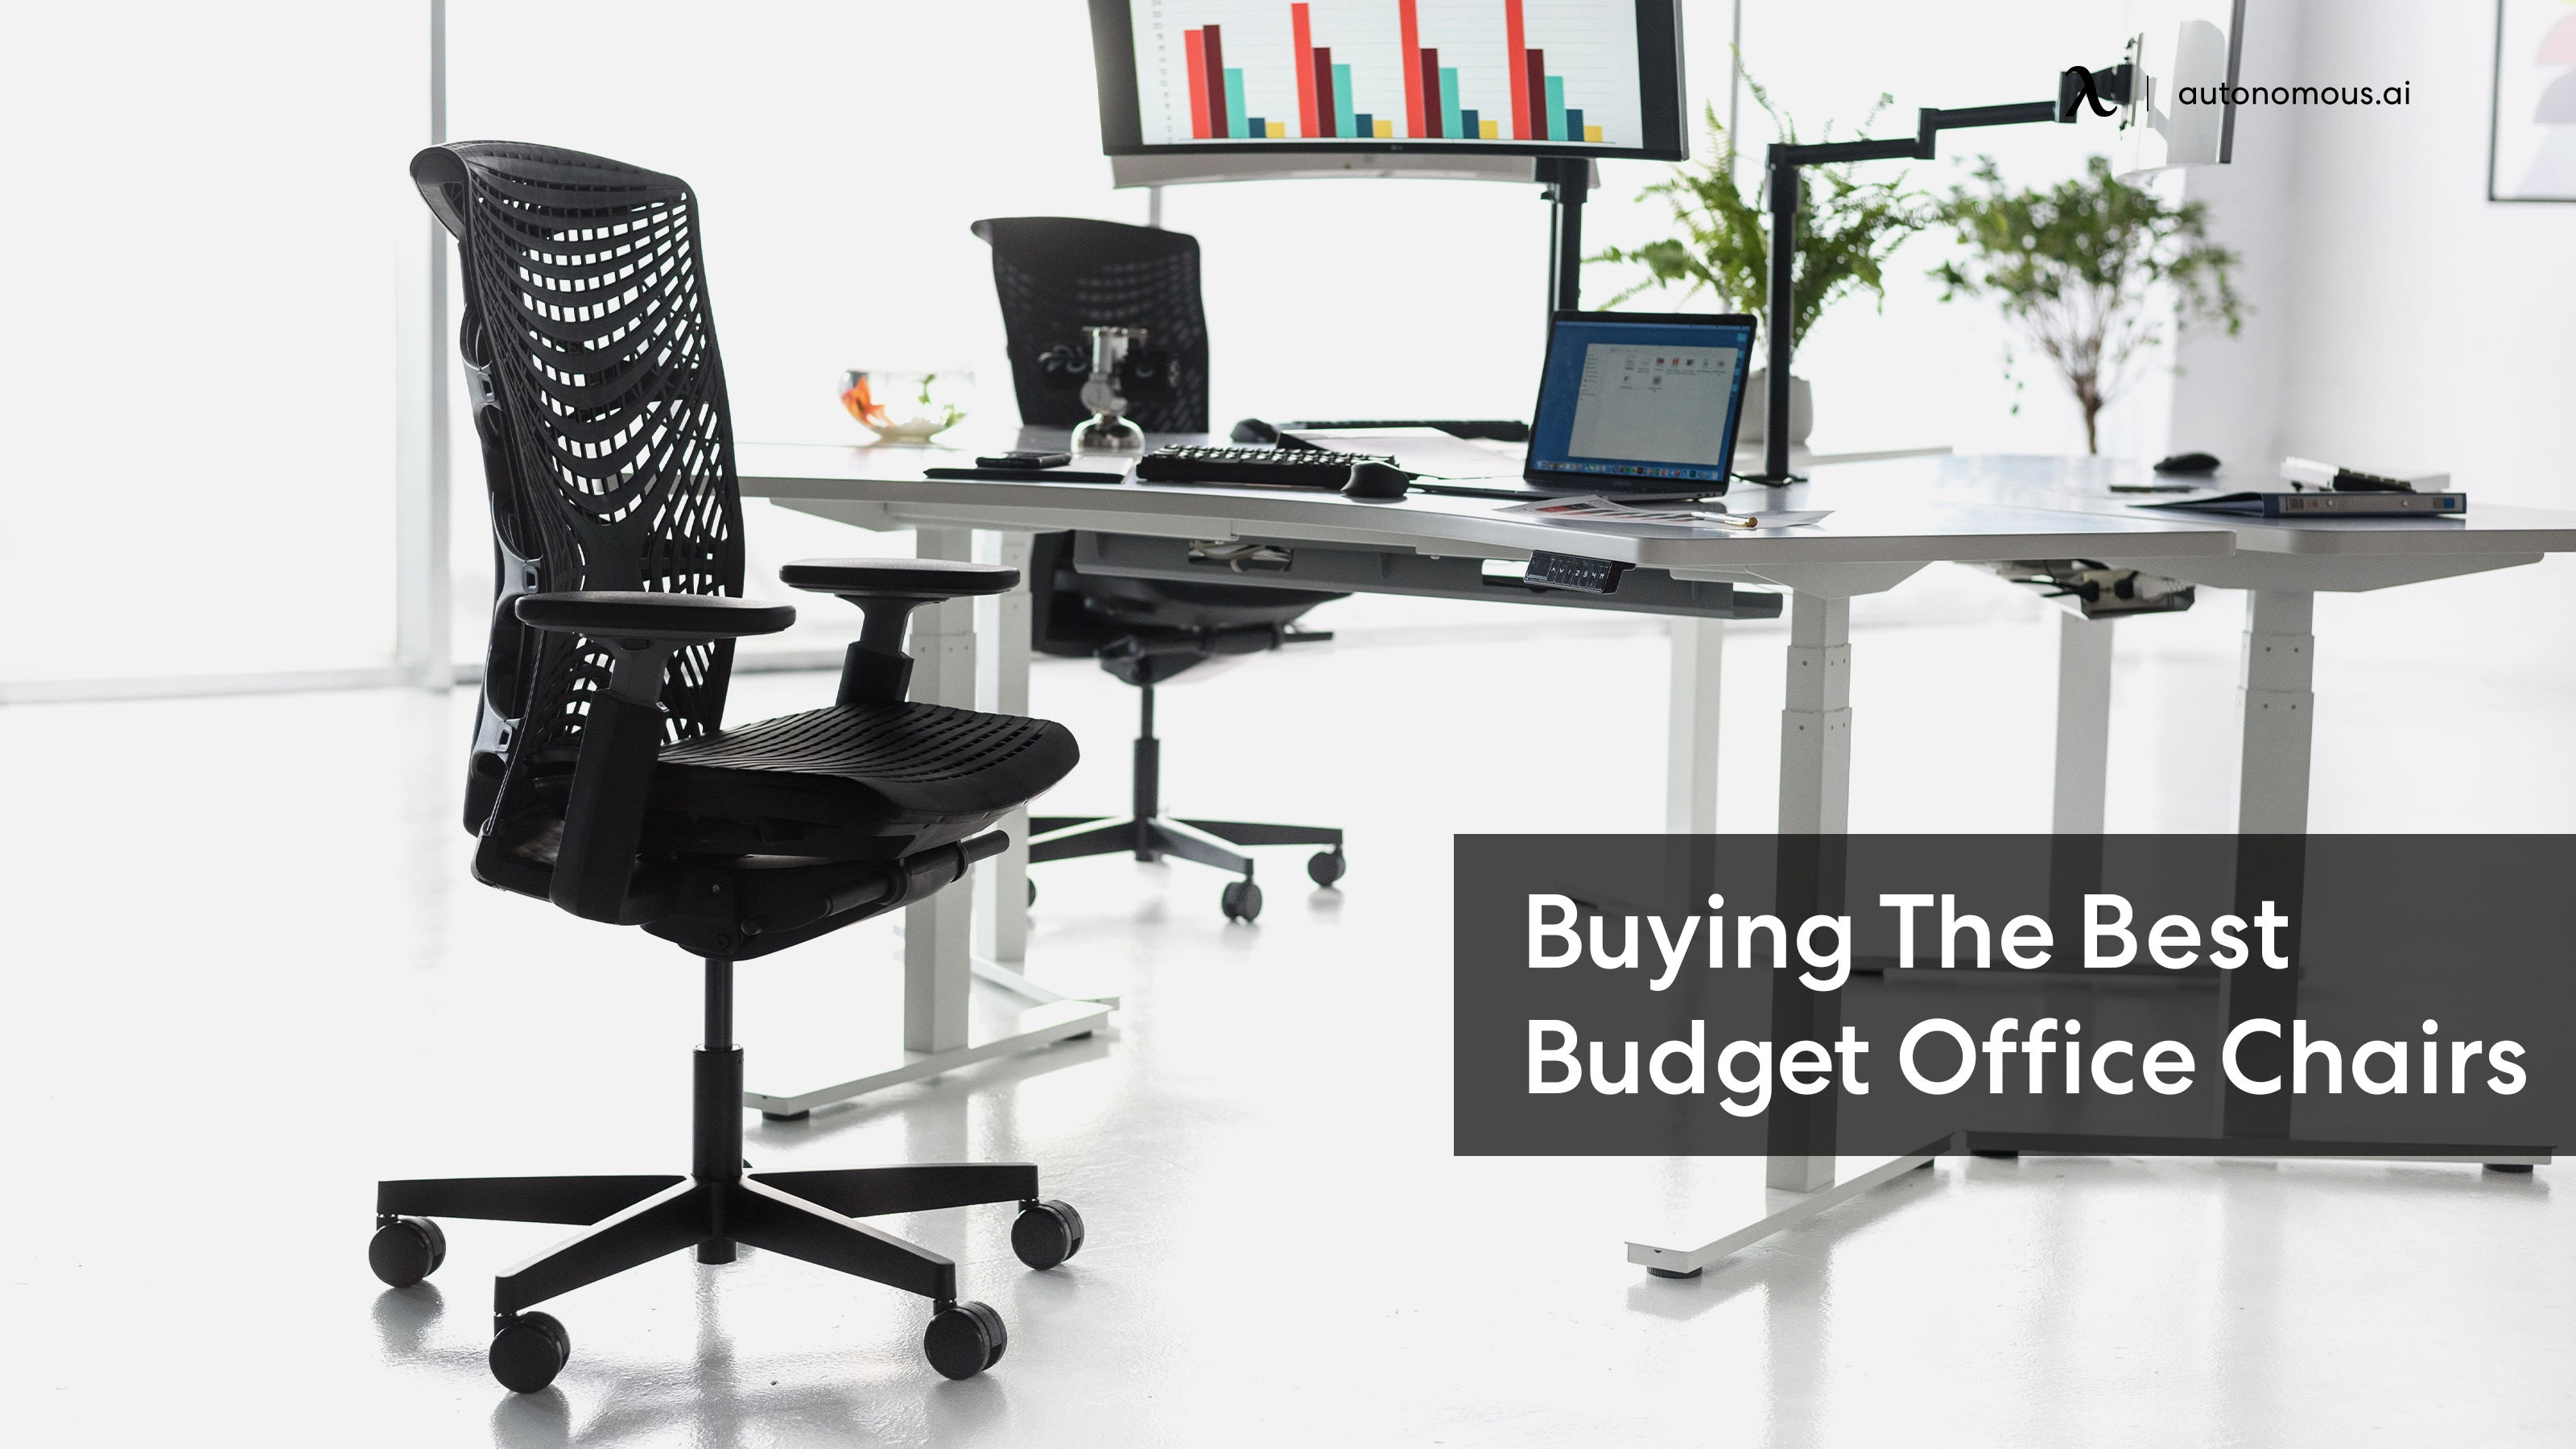 Best Budget Office Chairs: Guide to Finding the Best Deals and Retailers